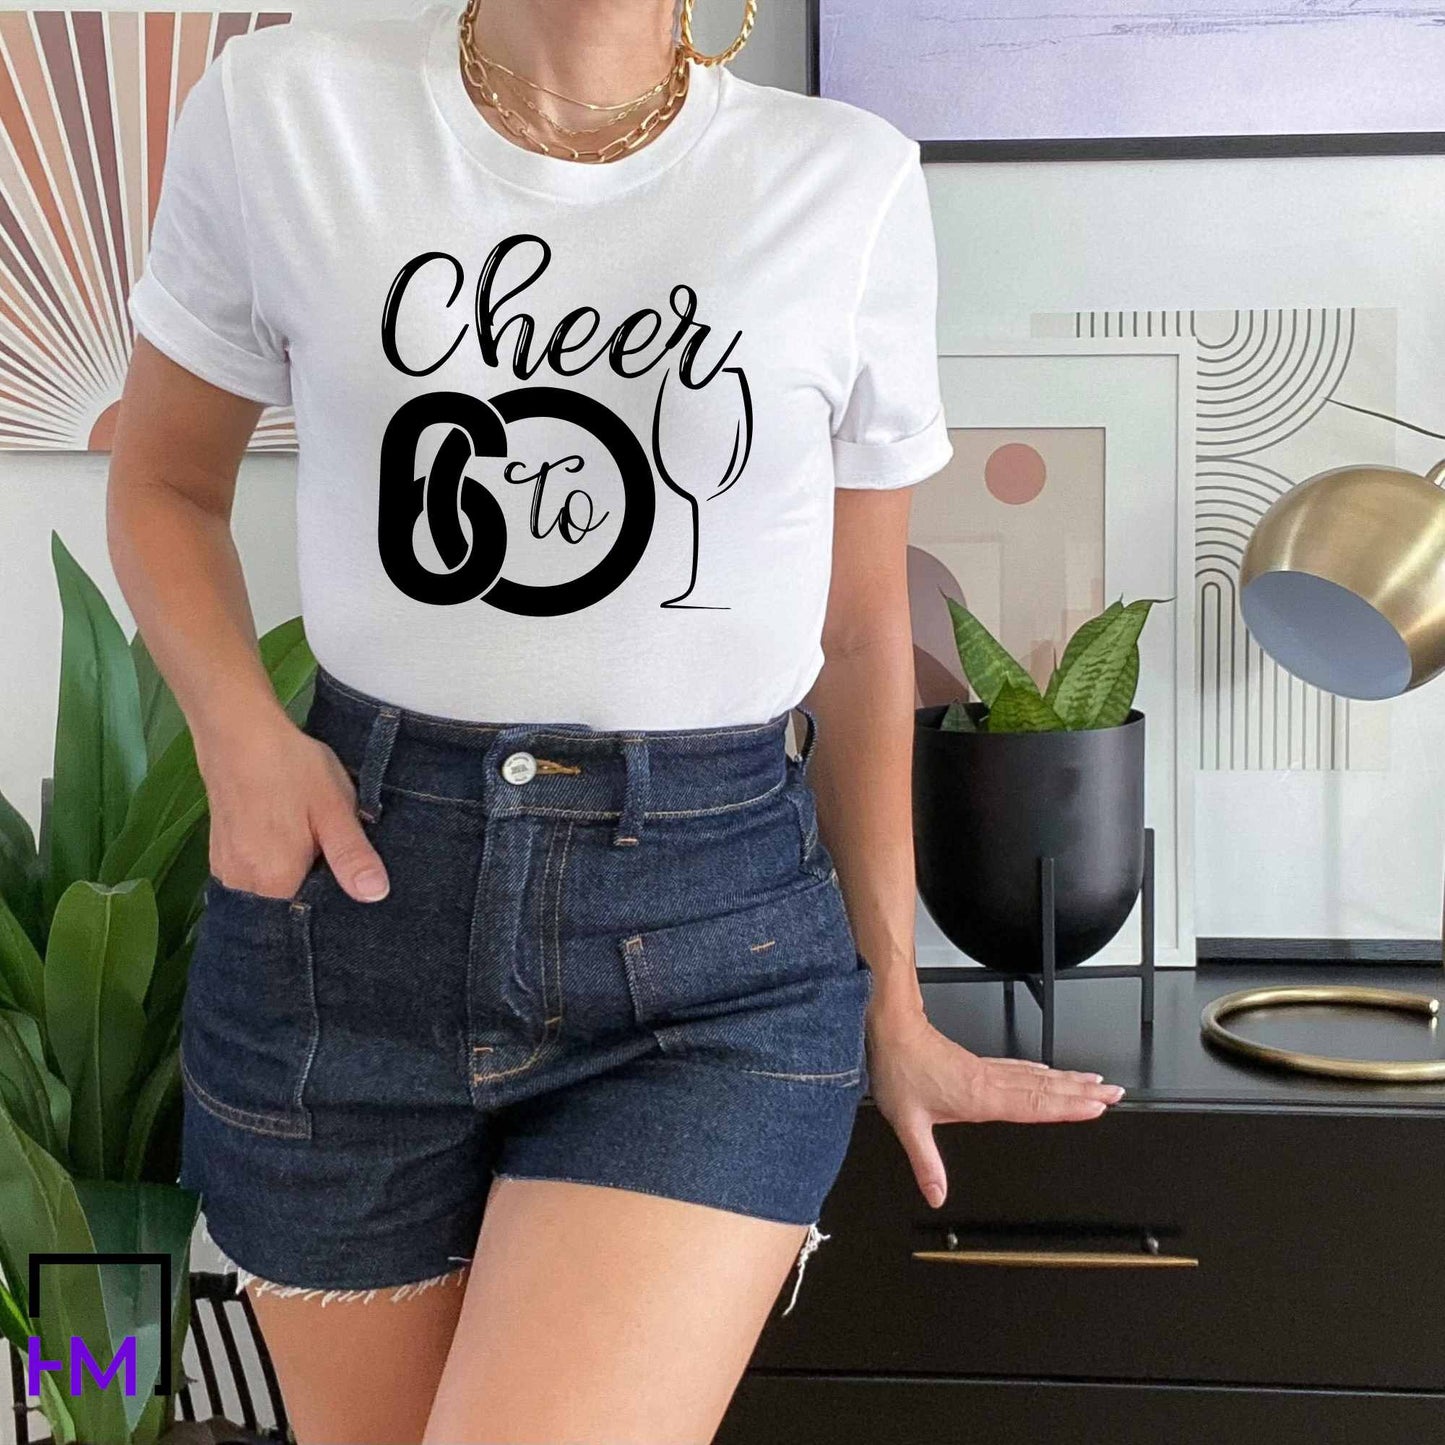 Cheers to 60, 60 Birthday Shirt for Women, Gift for 60th Birthday Party